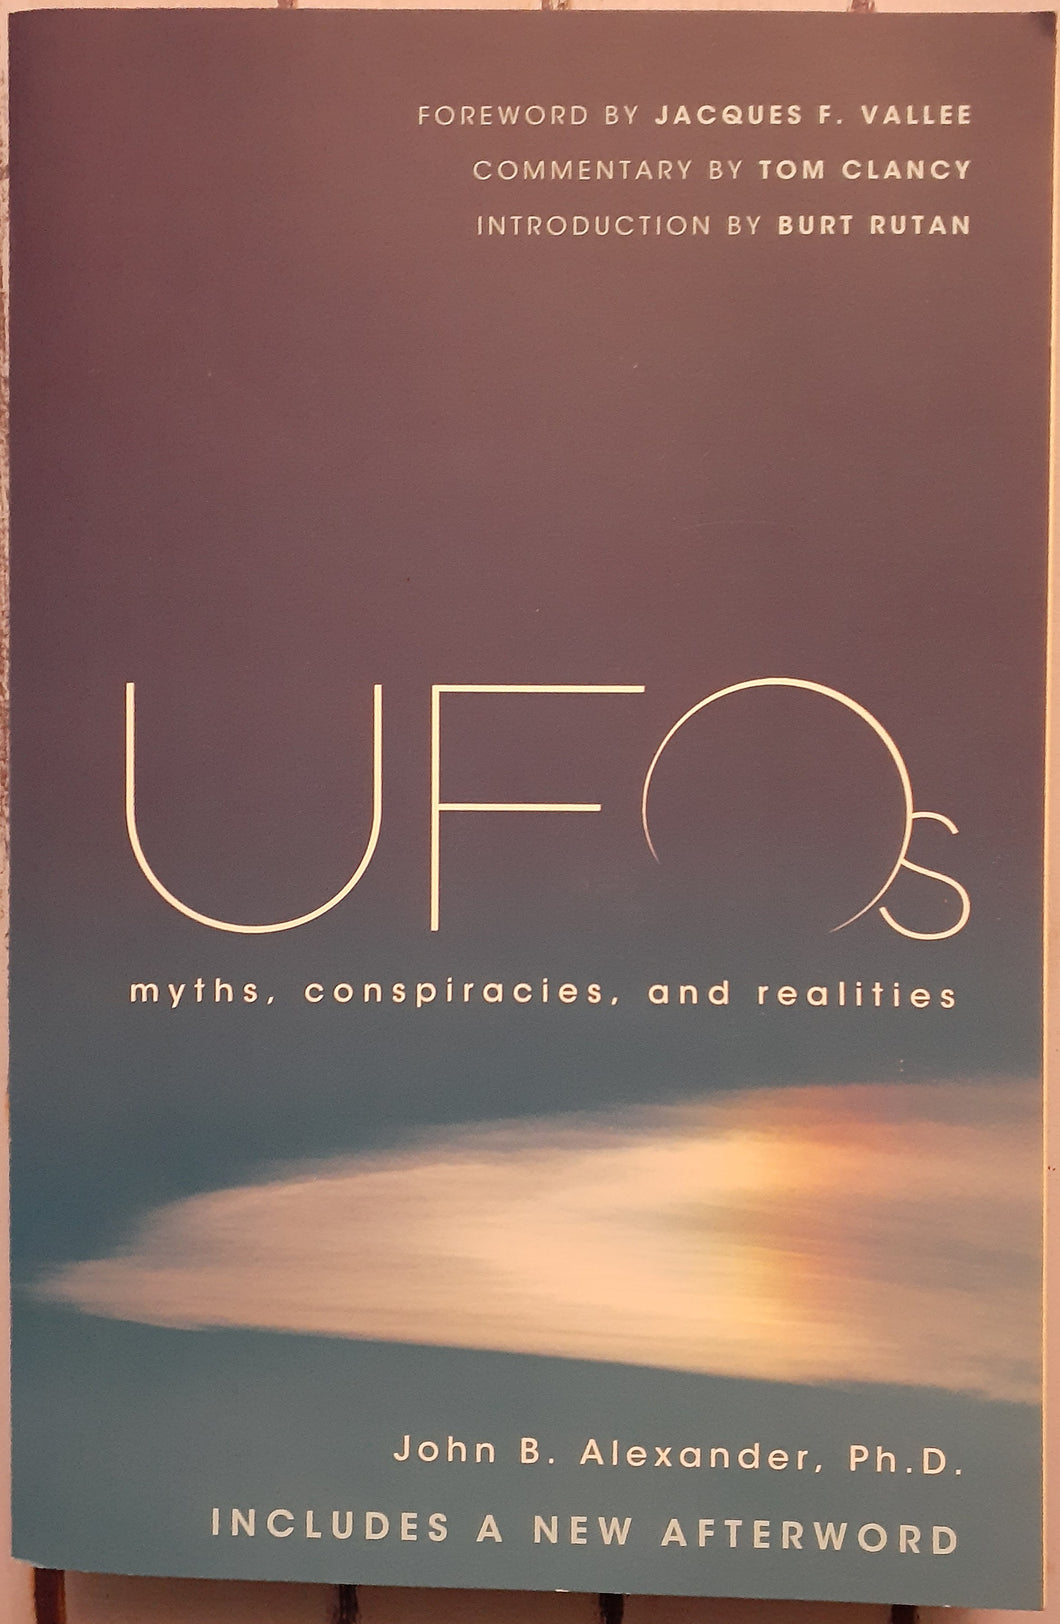 Ufo's: Myths, Conspiracies, and Realties